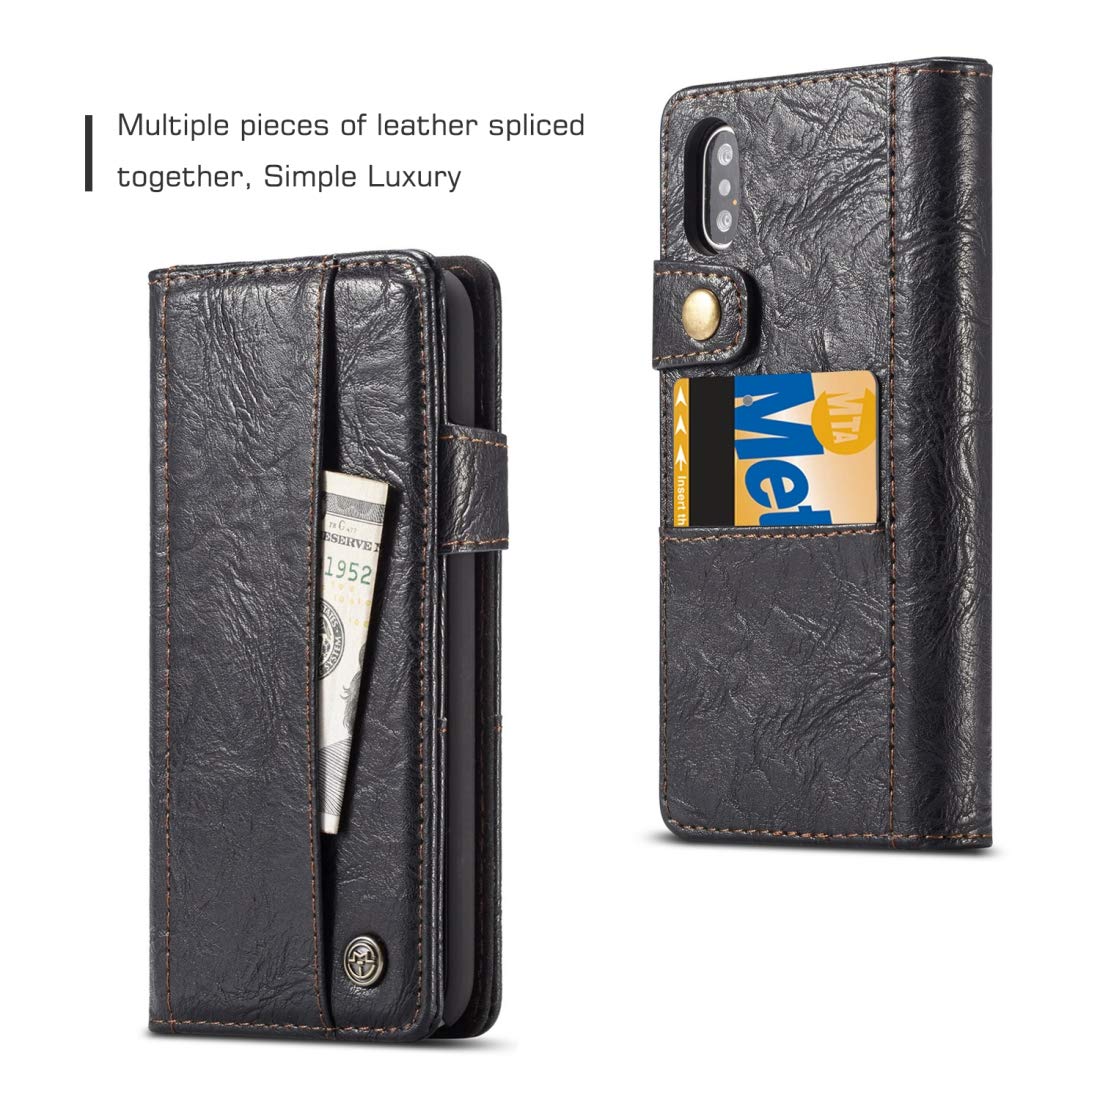 Excelsior Premium Leather Wallet flip Cover Case For Apple iPhone XS Max